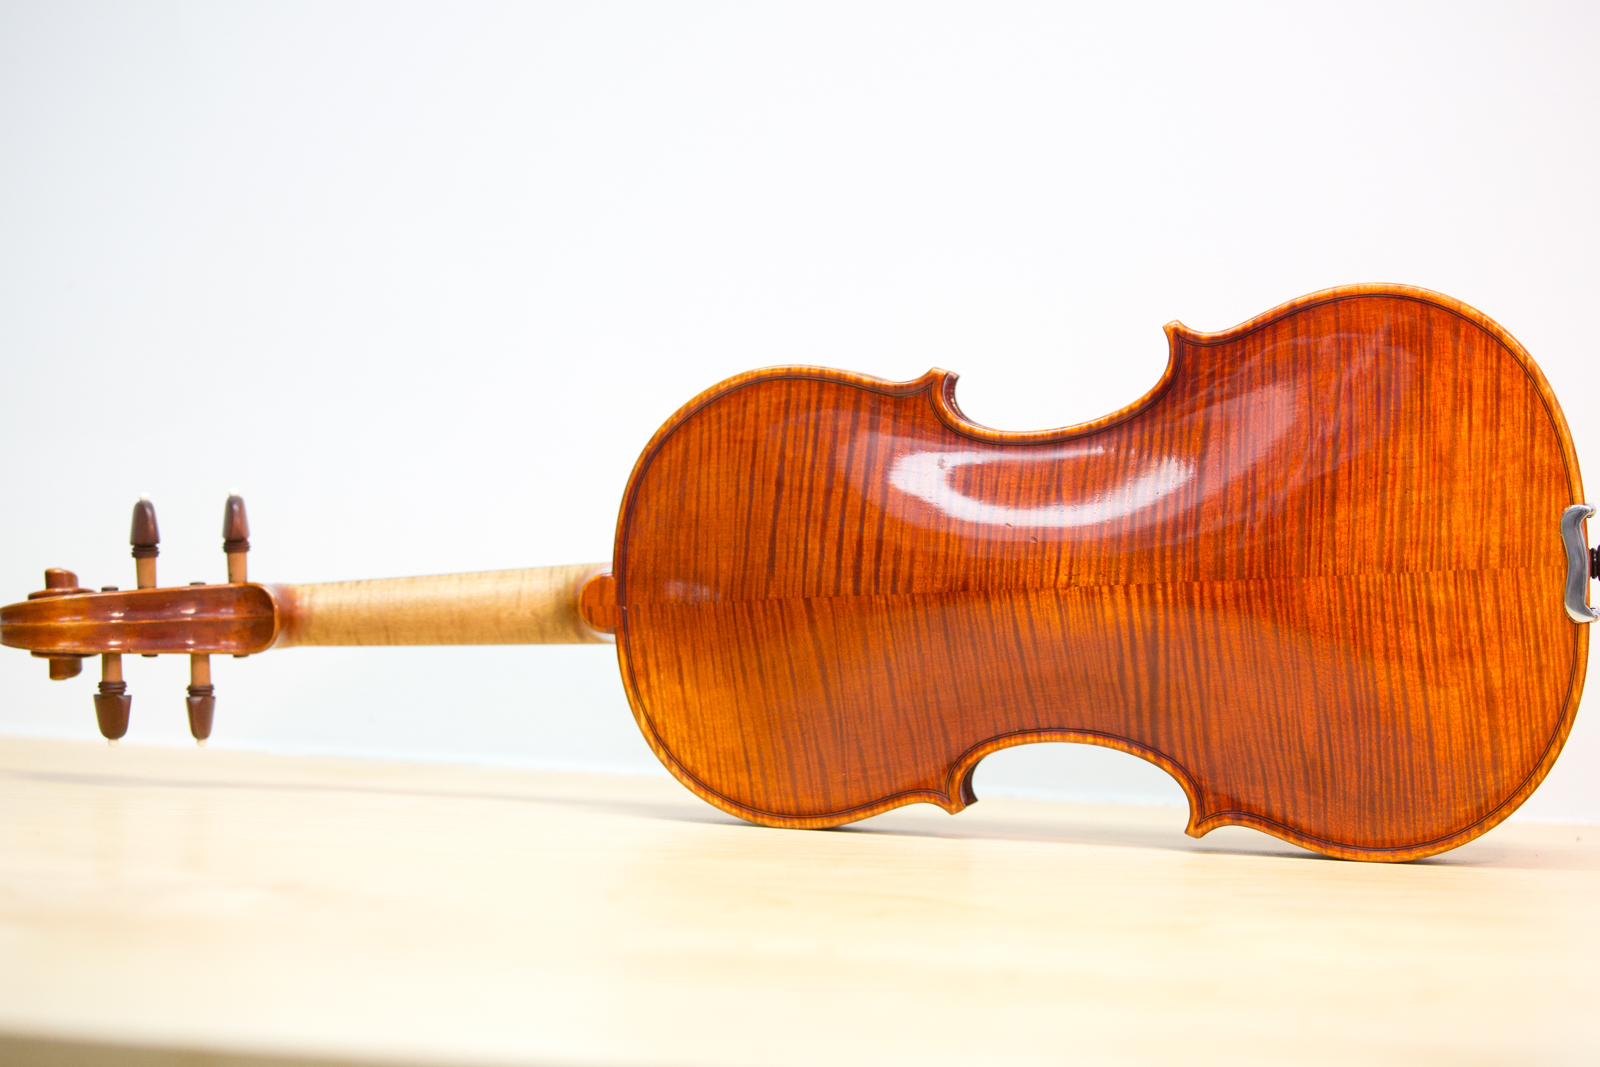 Appreciating the Musical Magic: Why the Most Expensive Violin Commands Such Awe